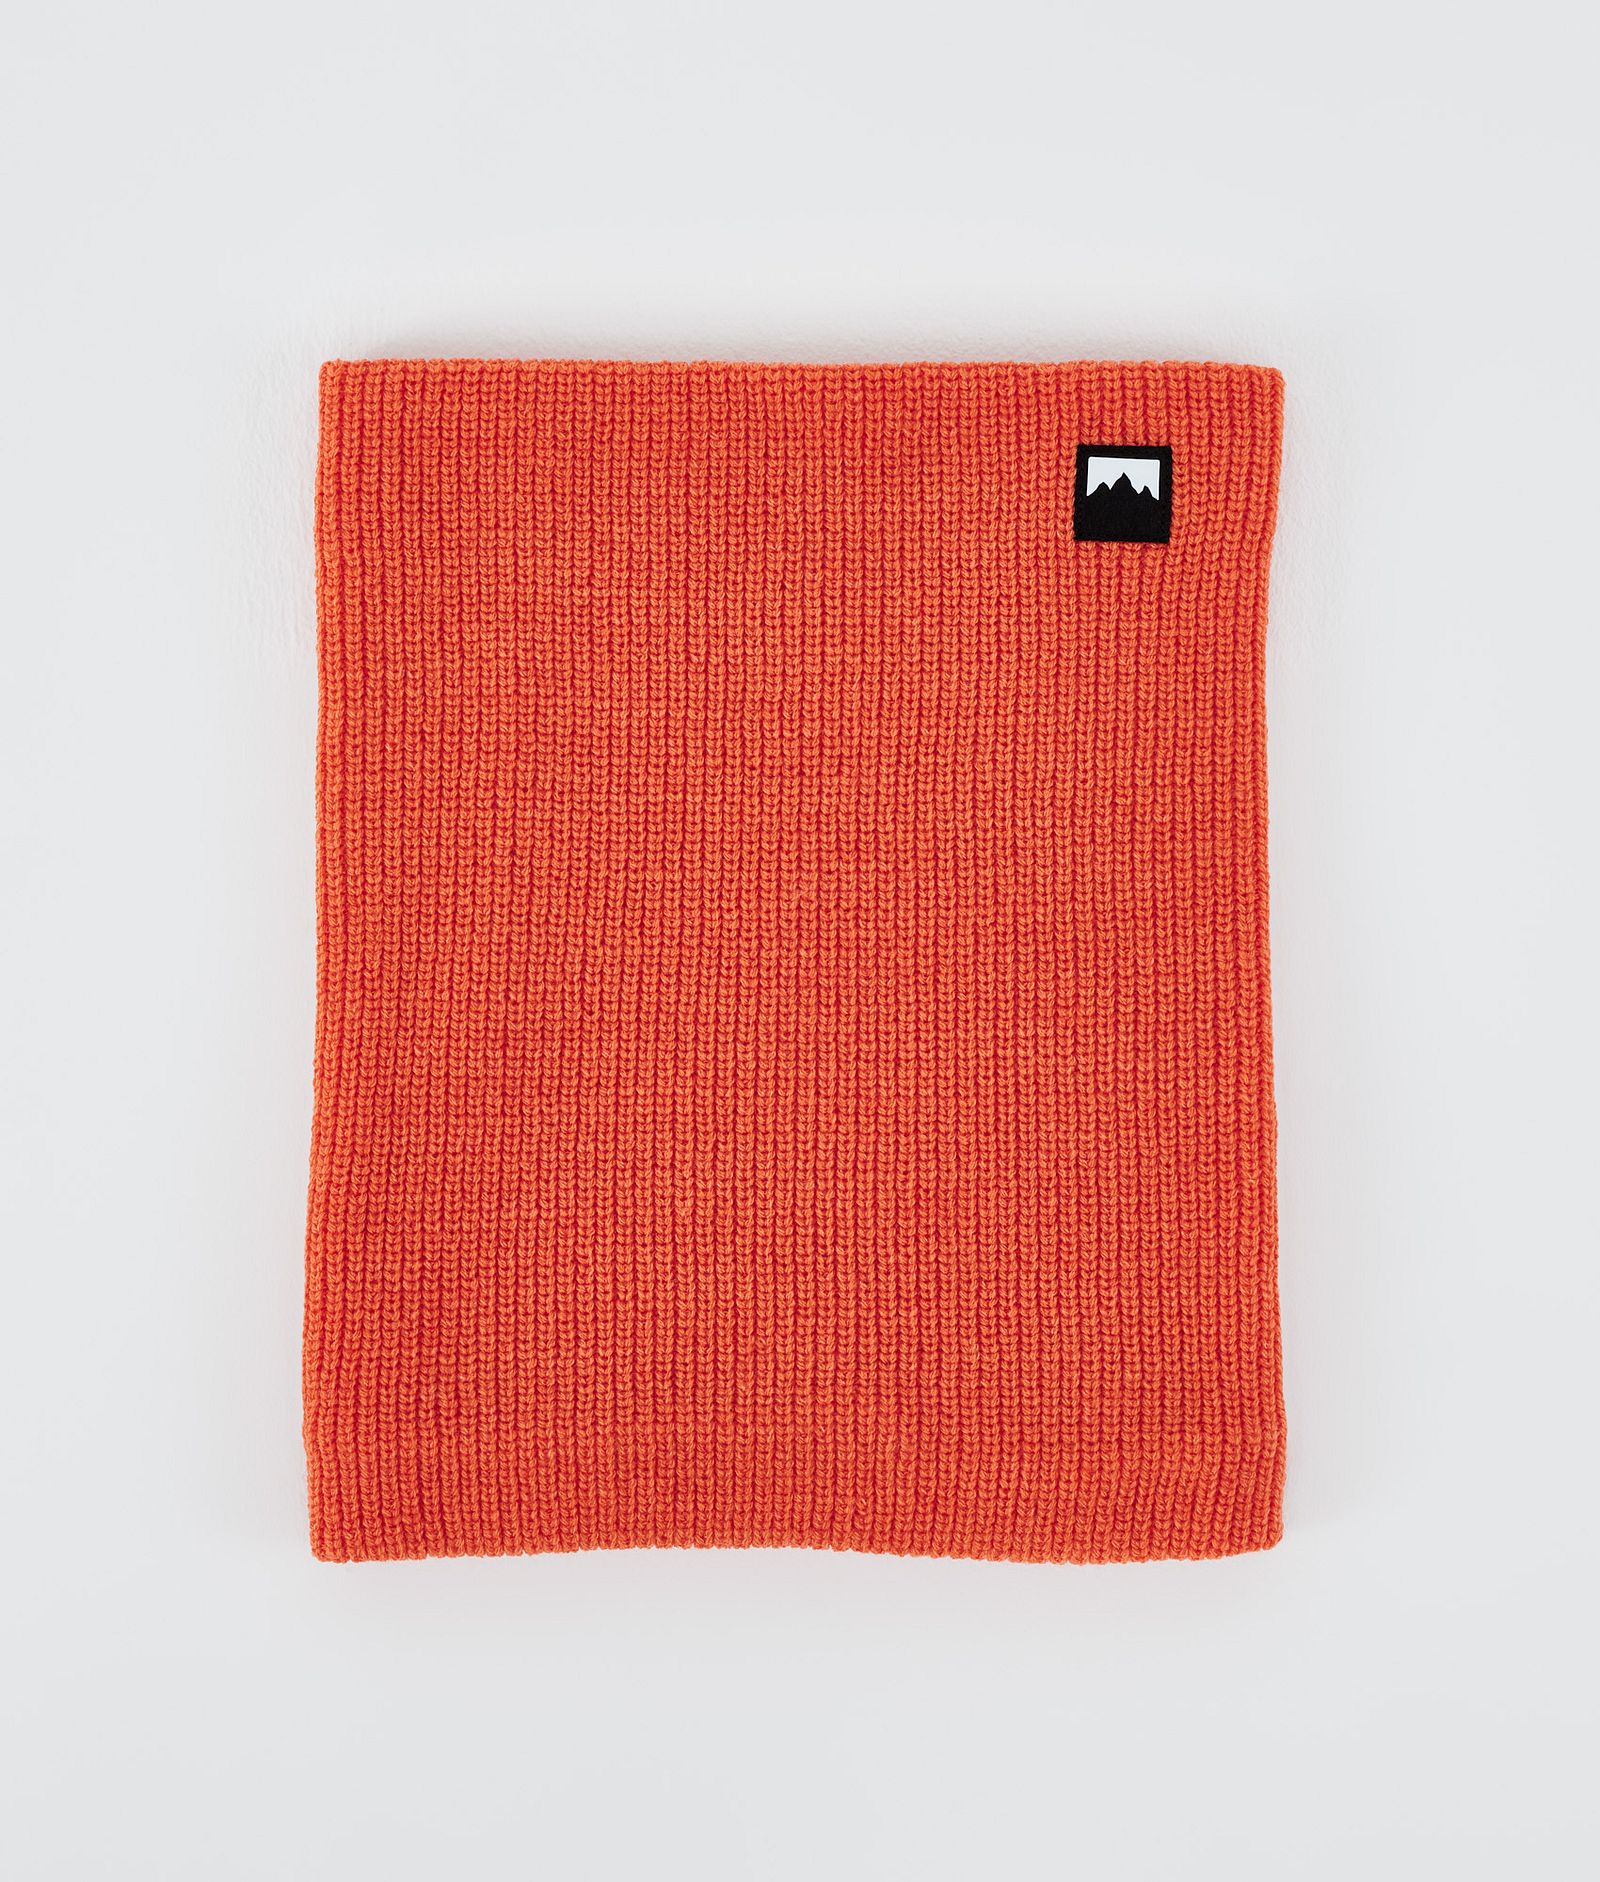 Classic Knitted 2022 Facemask Orange, Image 1 of 3